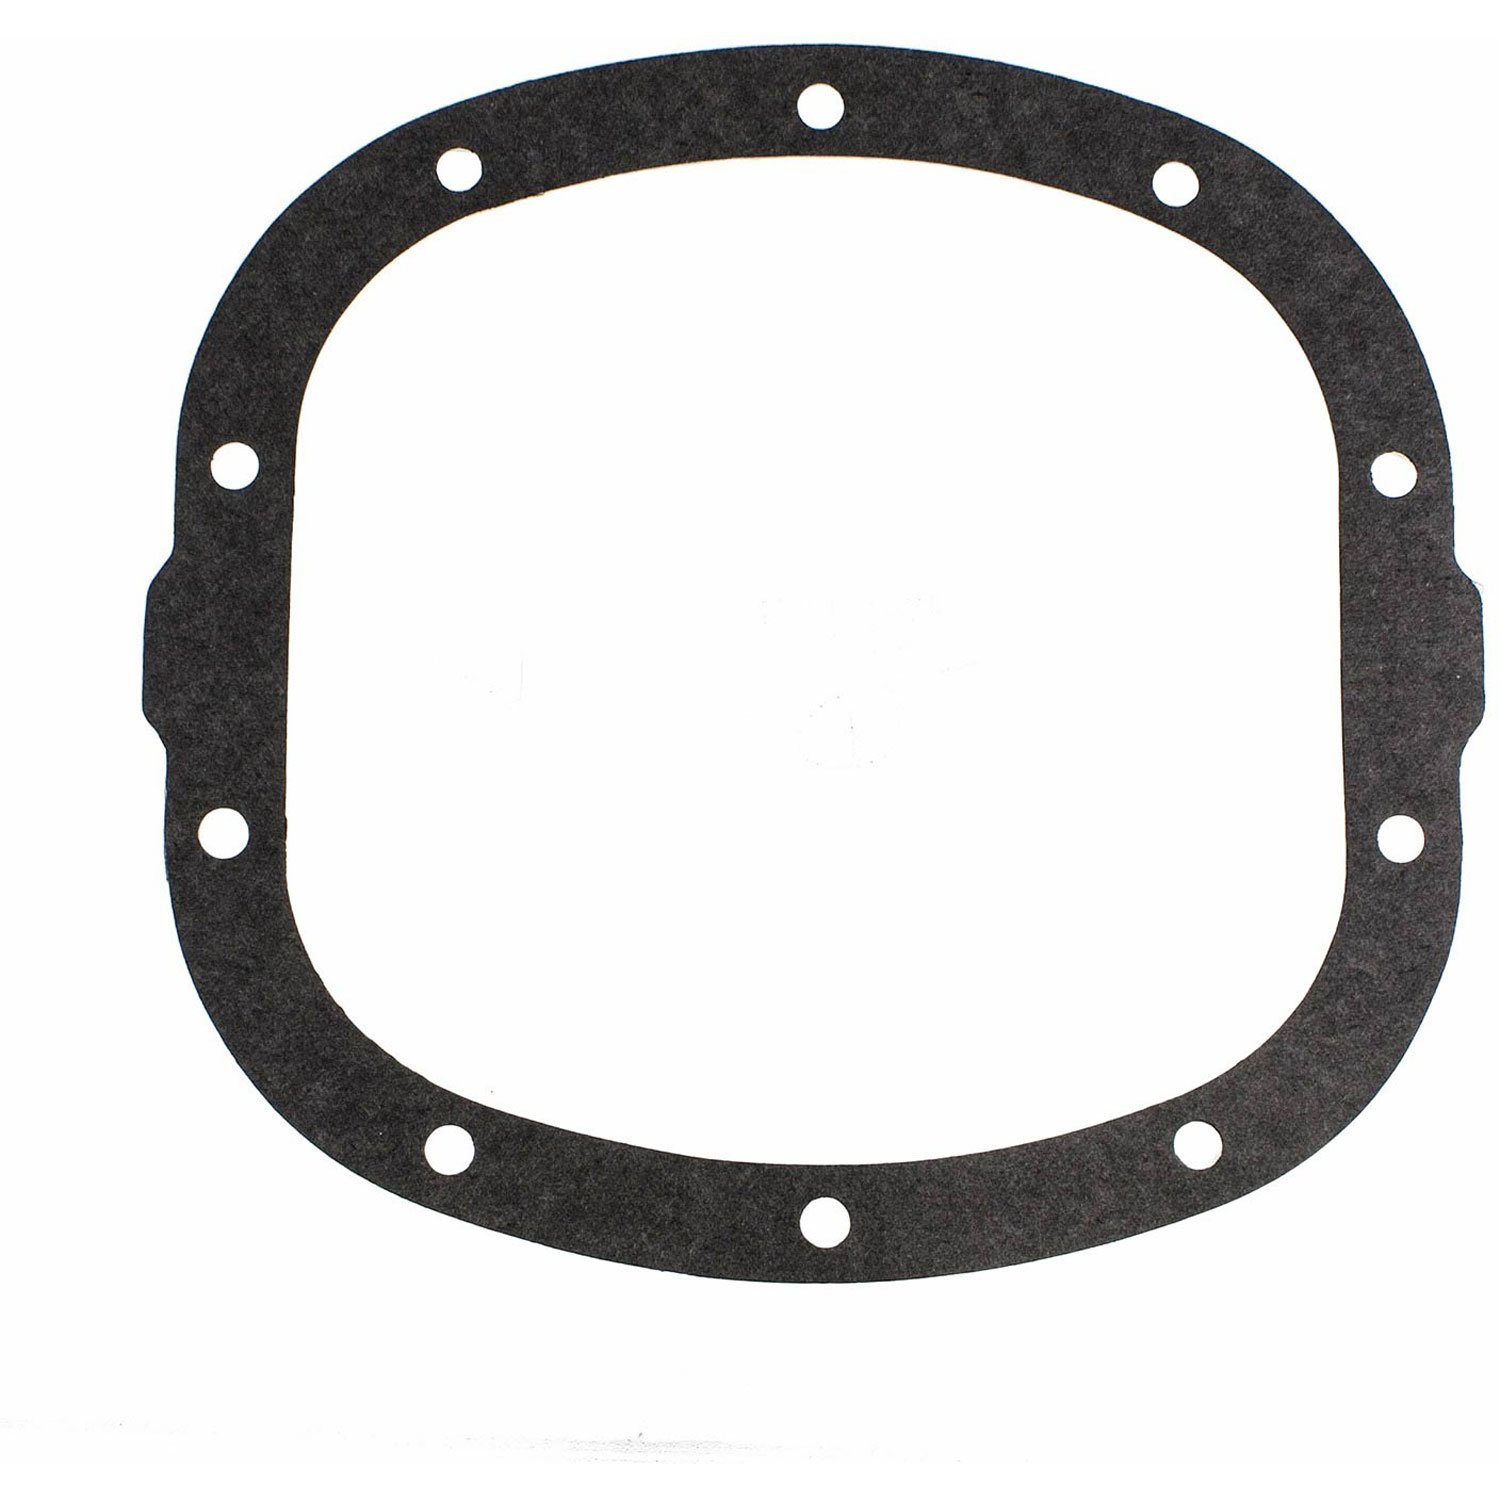 Differential Cover Gasket GM 7.5/7.625"